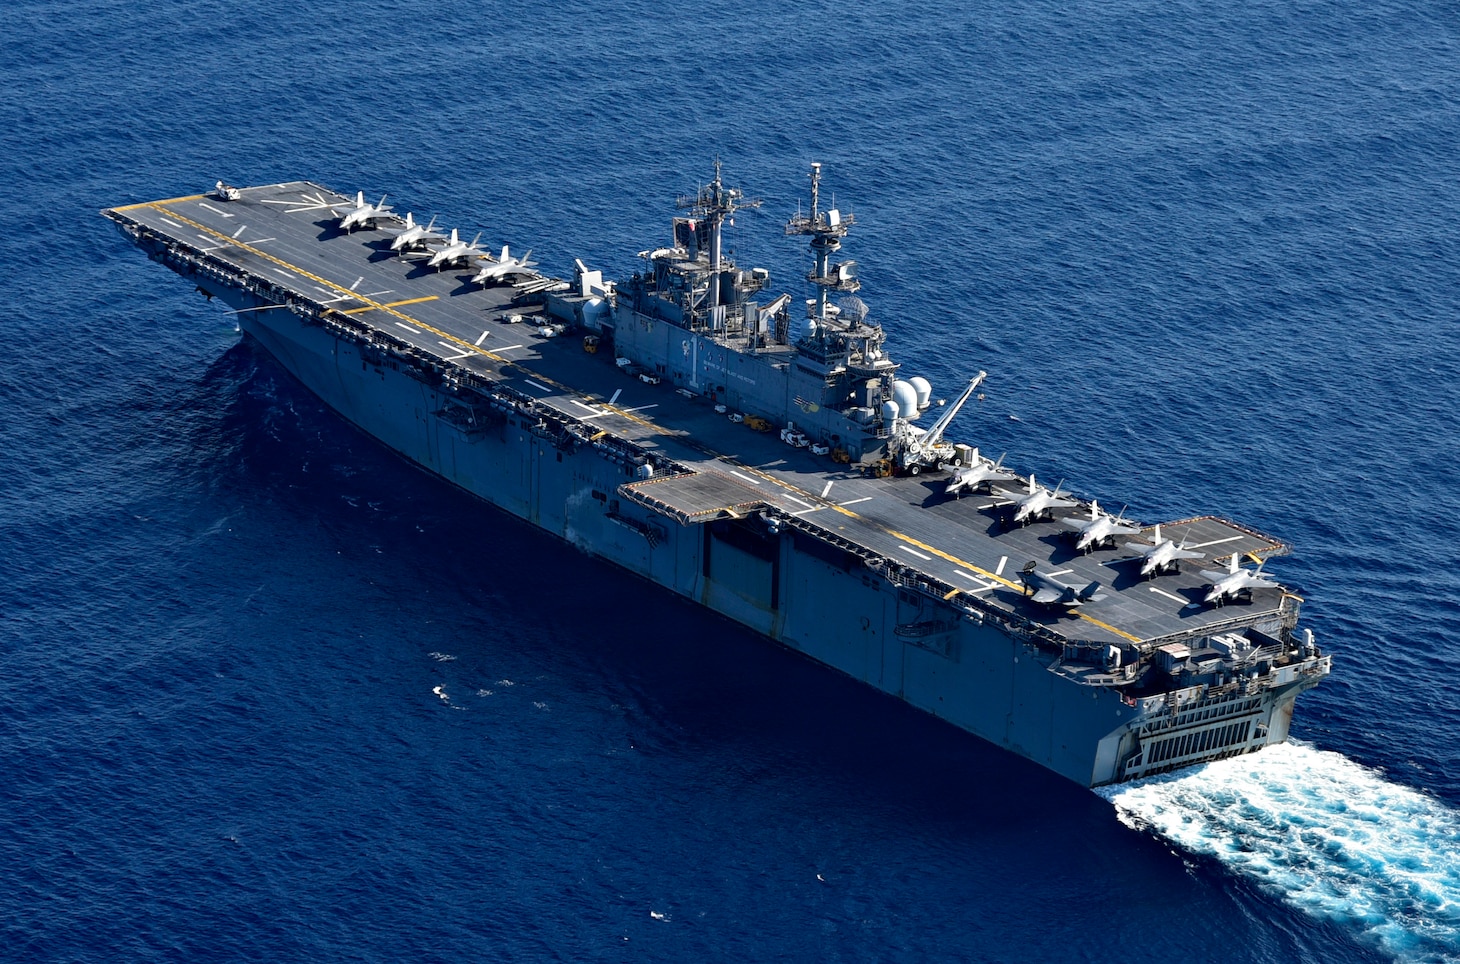 The amphibious assault ship USS Wasp (LHD 1) is operating in the South China Sea in support of Exercise Balikatan 2019. In its 35th iteration, Balikatan is an annual U.S.-Philippine military training exercise focused on a variety of missions, including humanitarian assistance and disaster relief, counter-terrorism, and other combined military operations.